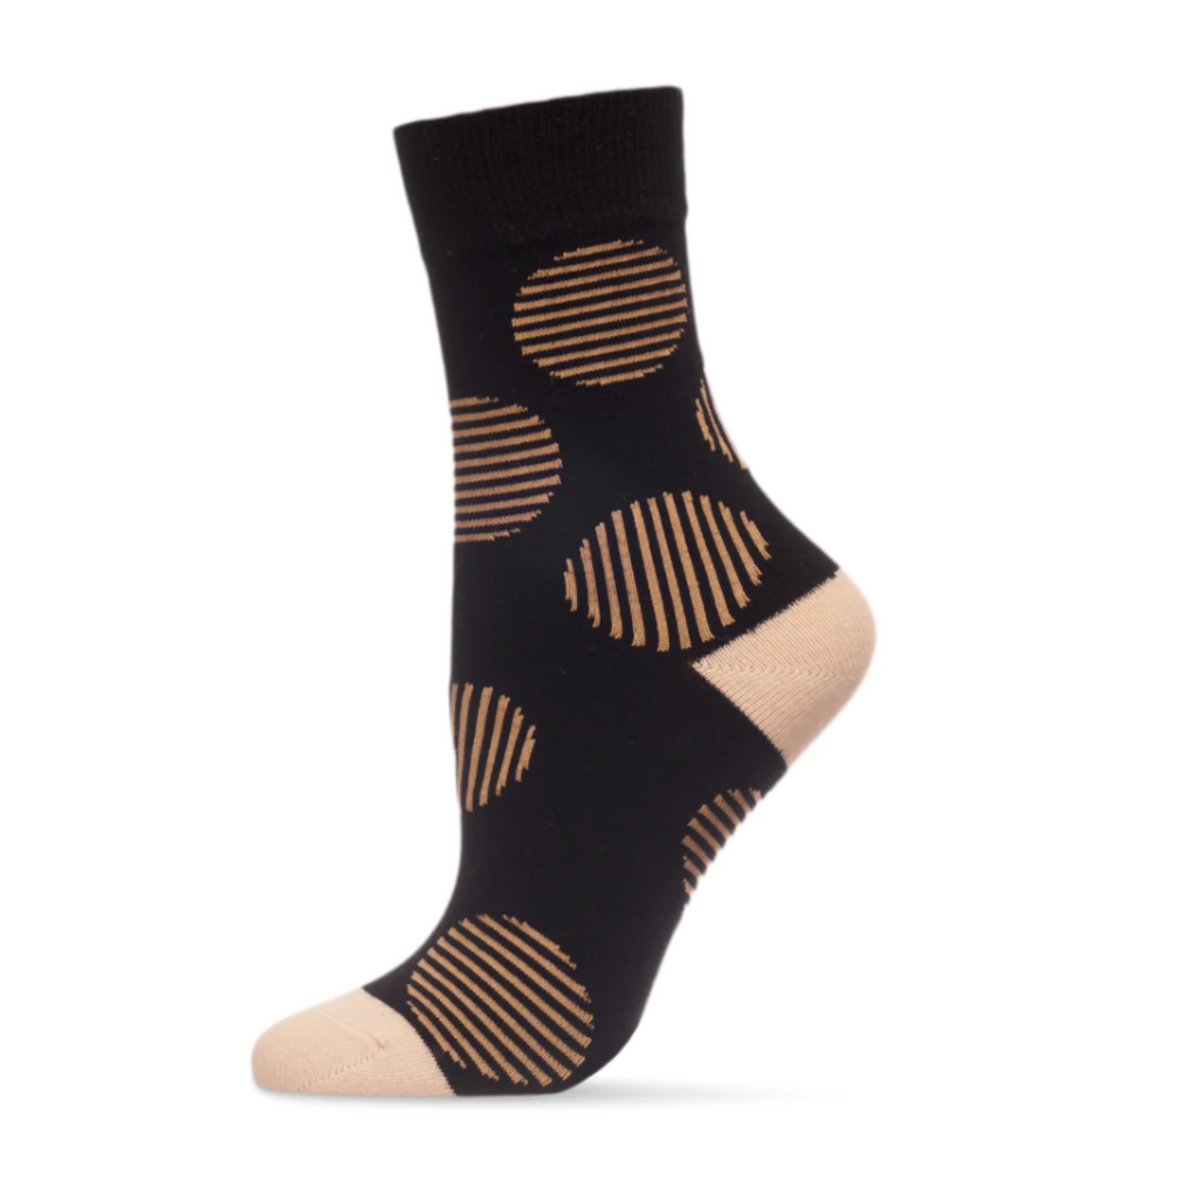 MeMoi Retro Circle women&#39;s Crew sock featuring black sock with brown stripes in circle patterns all over. Socks shown on display foot from side.